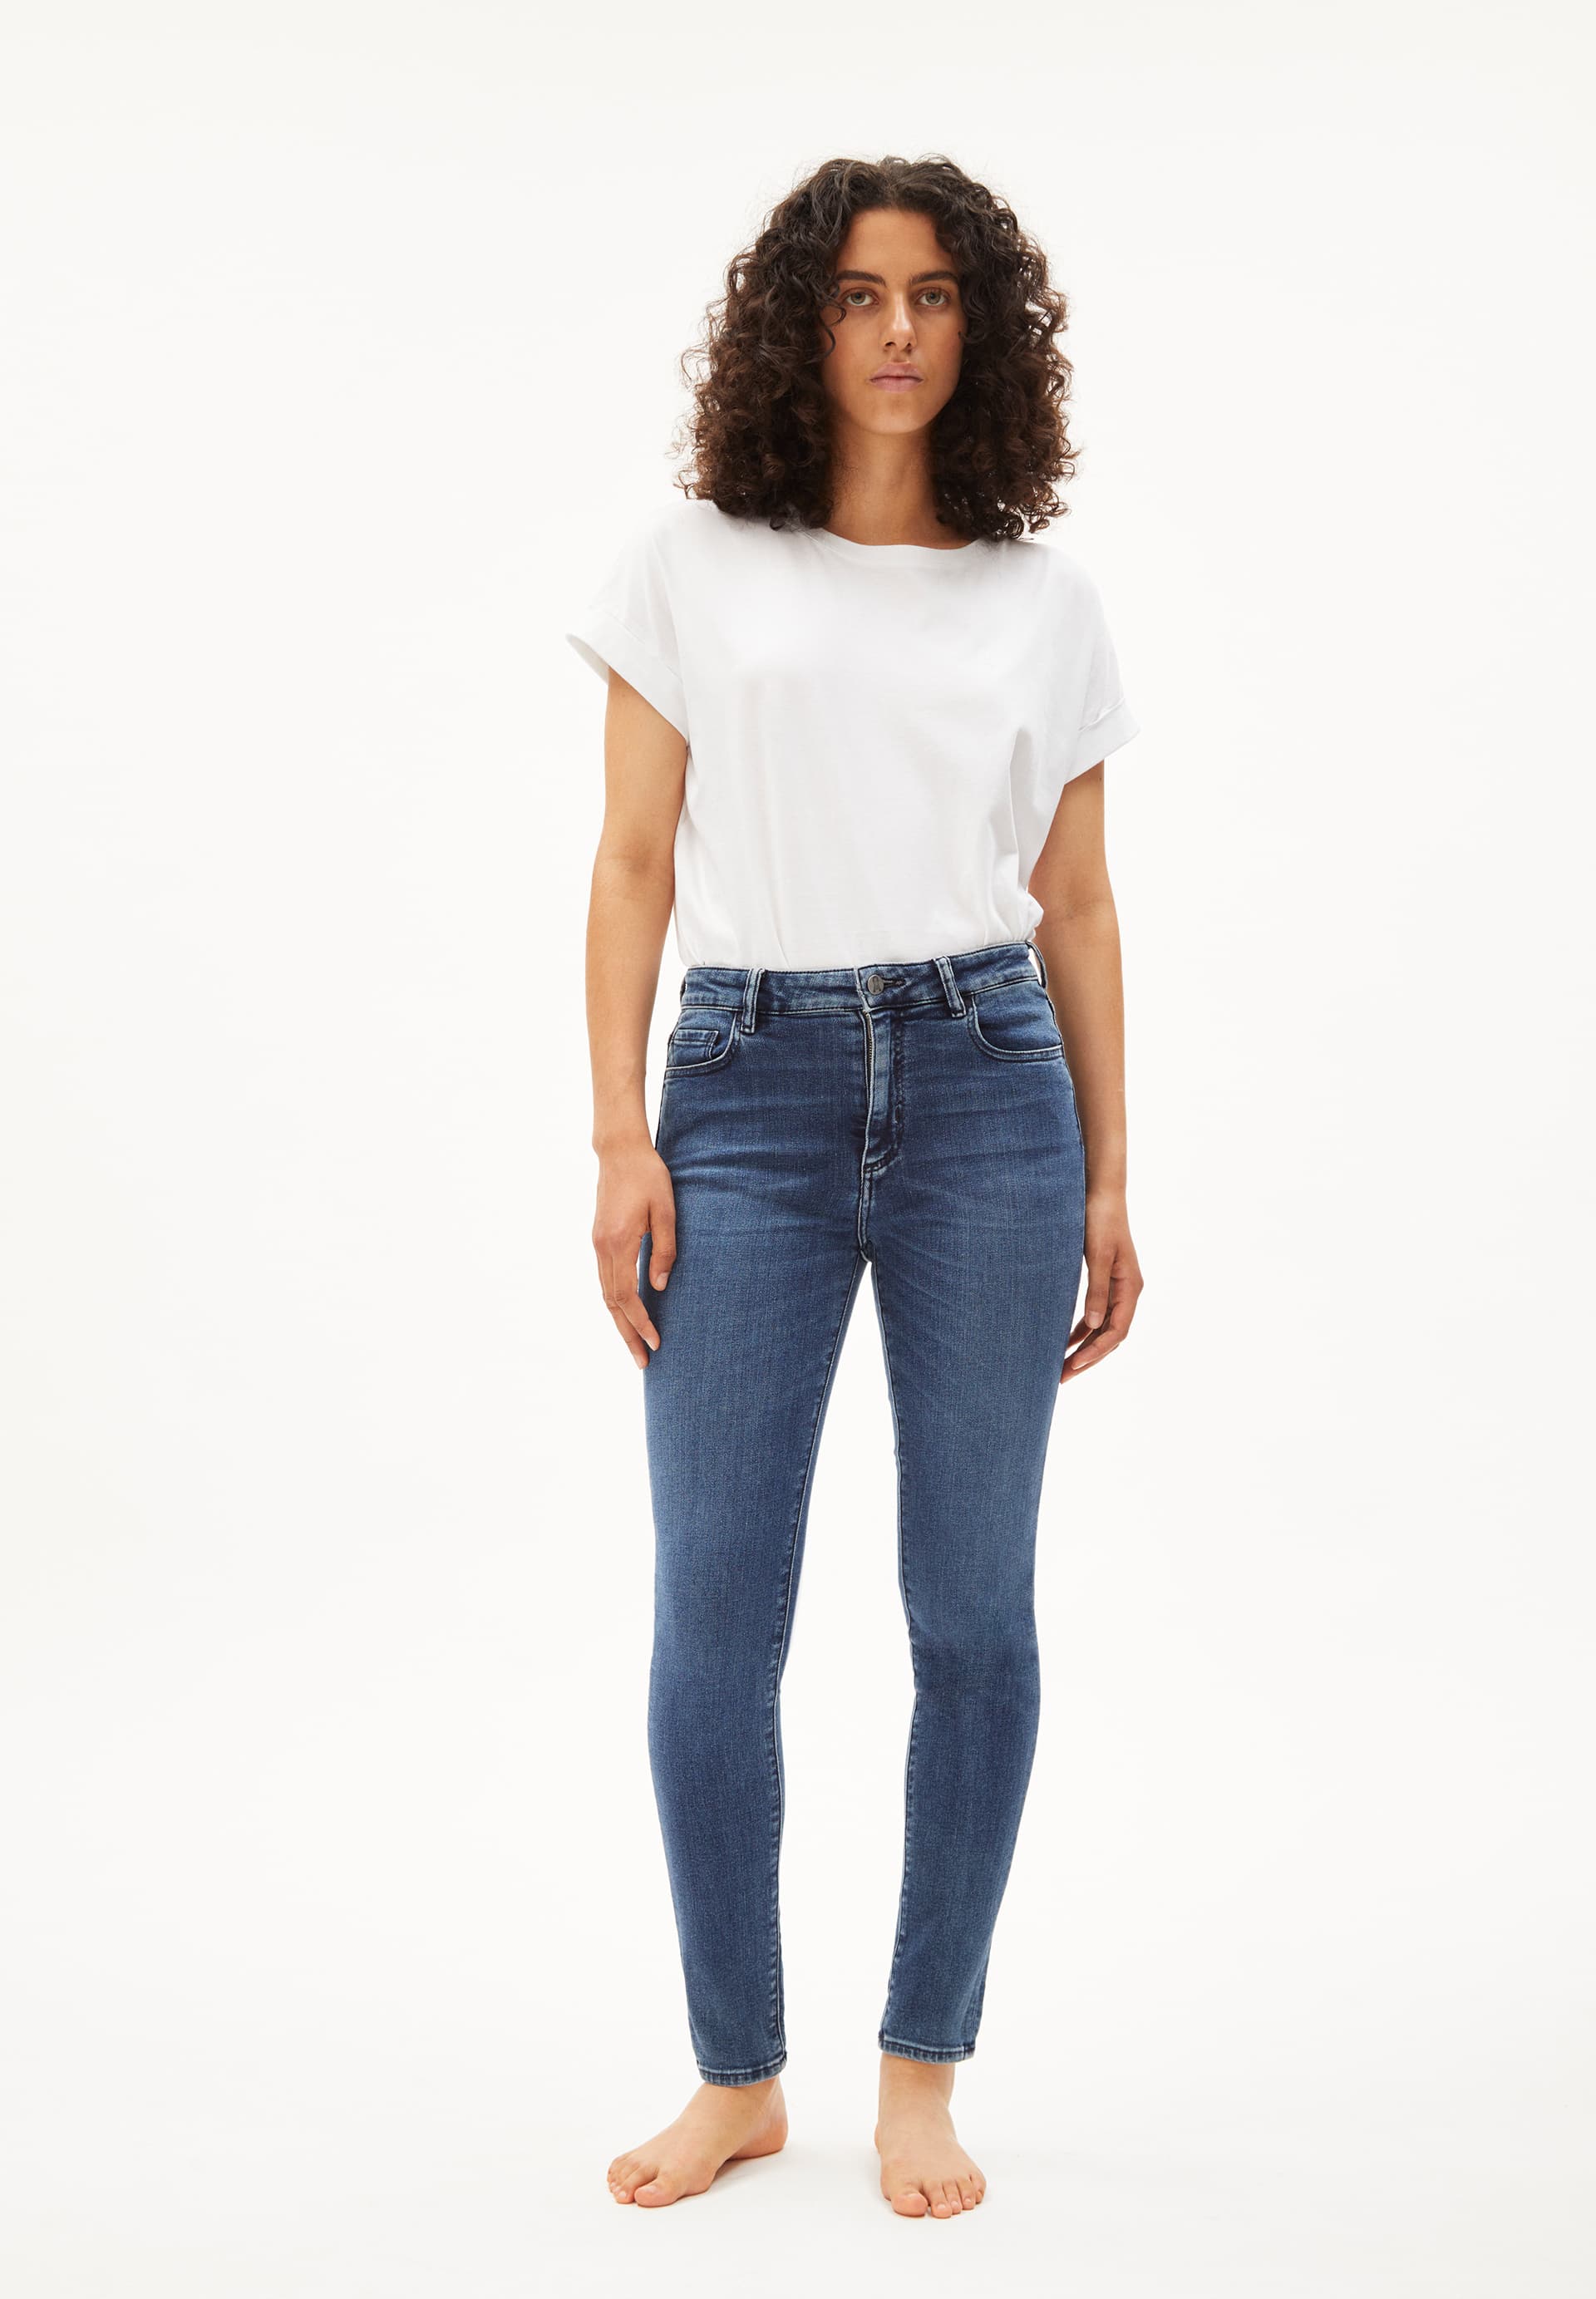 TILLAA X STRETCH Skinny Fit Mid Waist made of Organic Cotton Mix